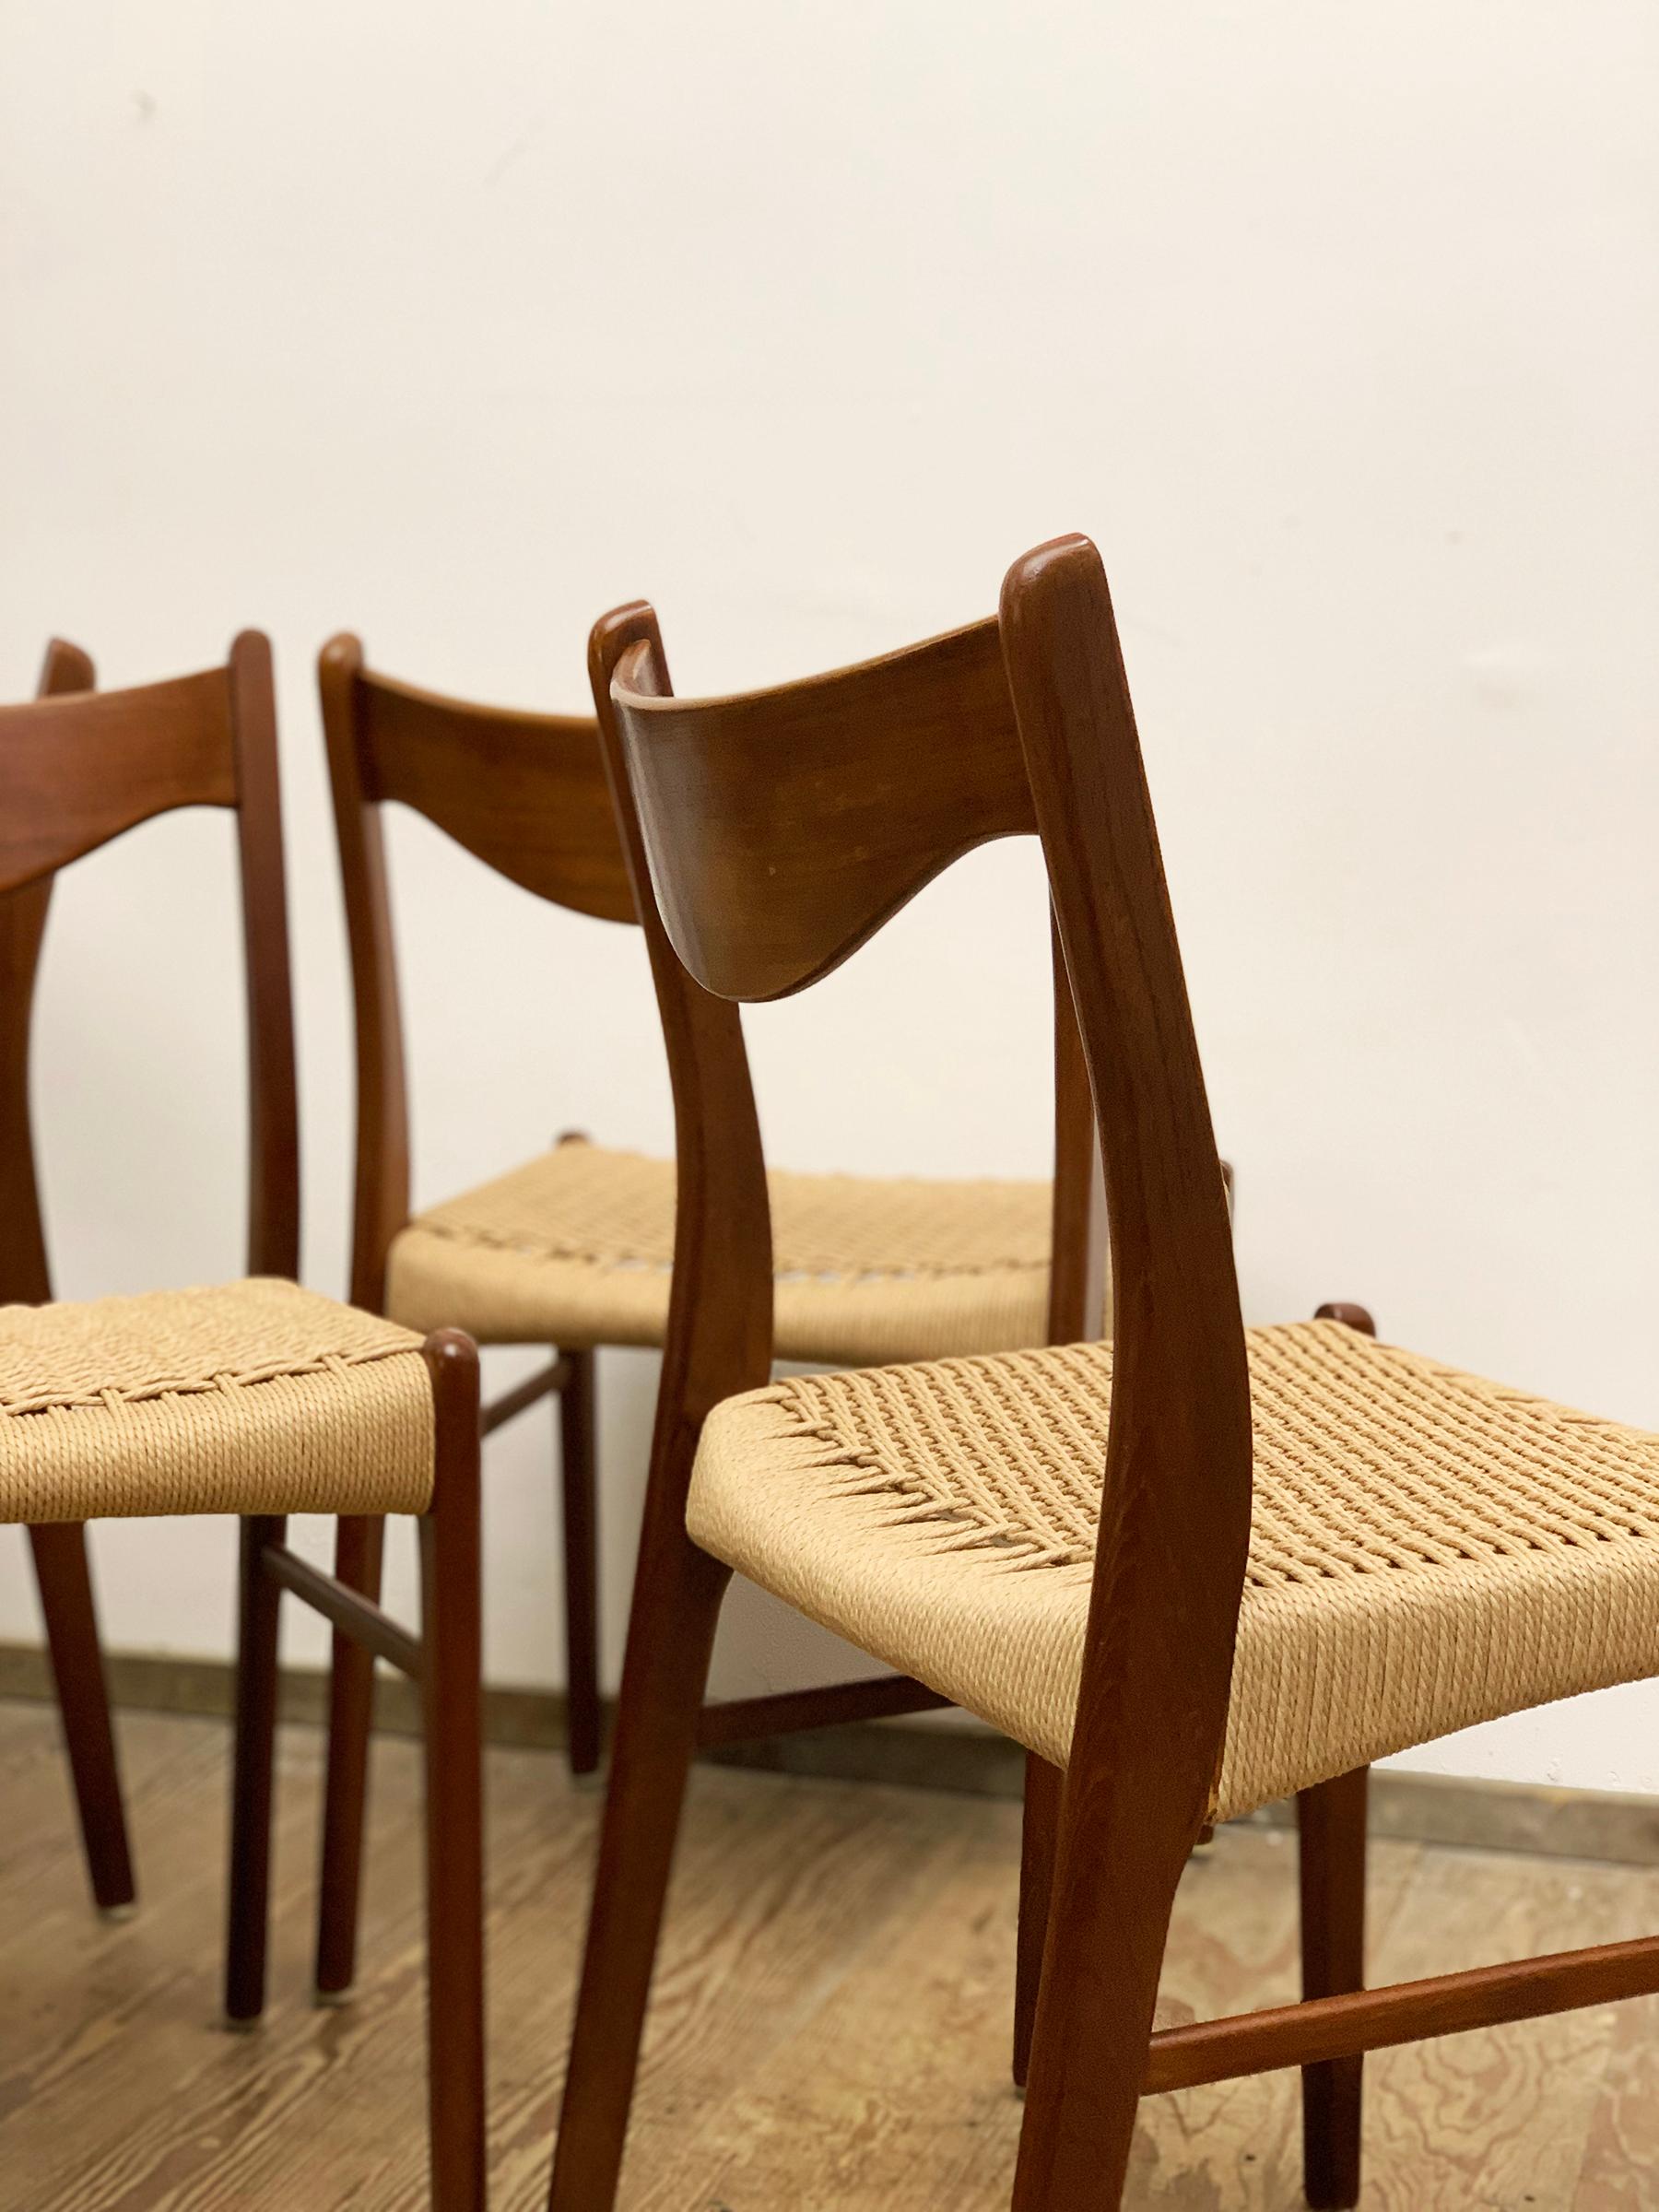 Mid-20th Century Danish Mid-Century GS60 Chairs in Teak by Arne Wahl Iversen for Glyngøre 